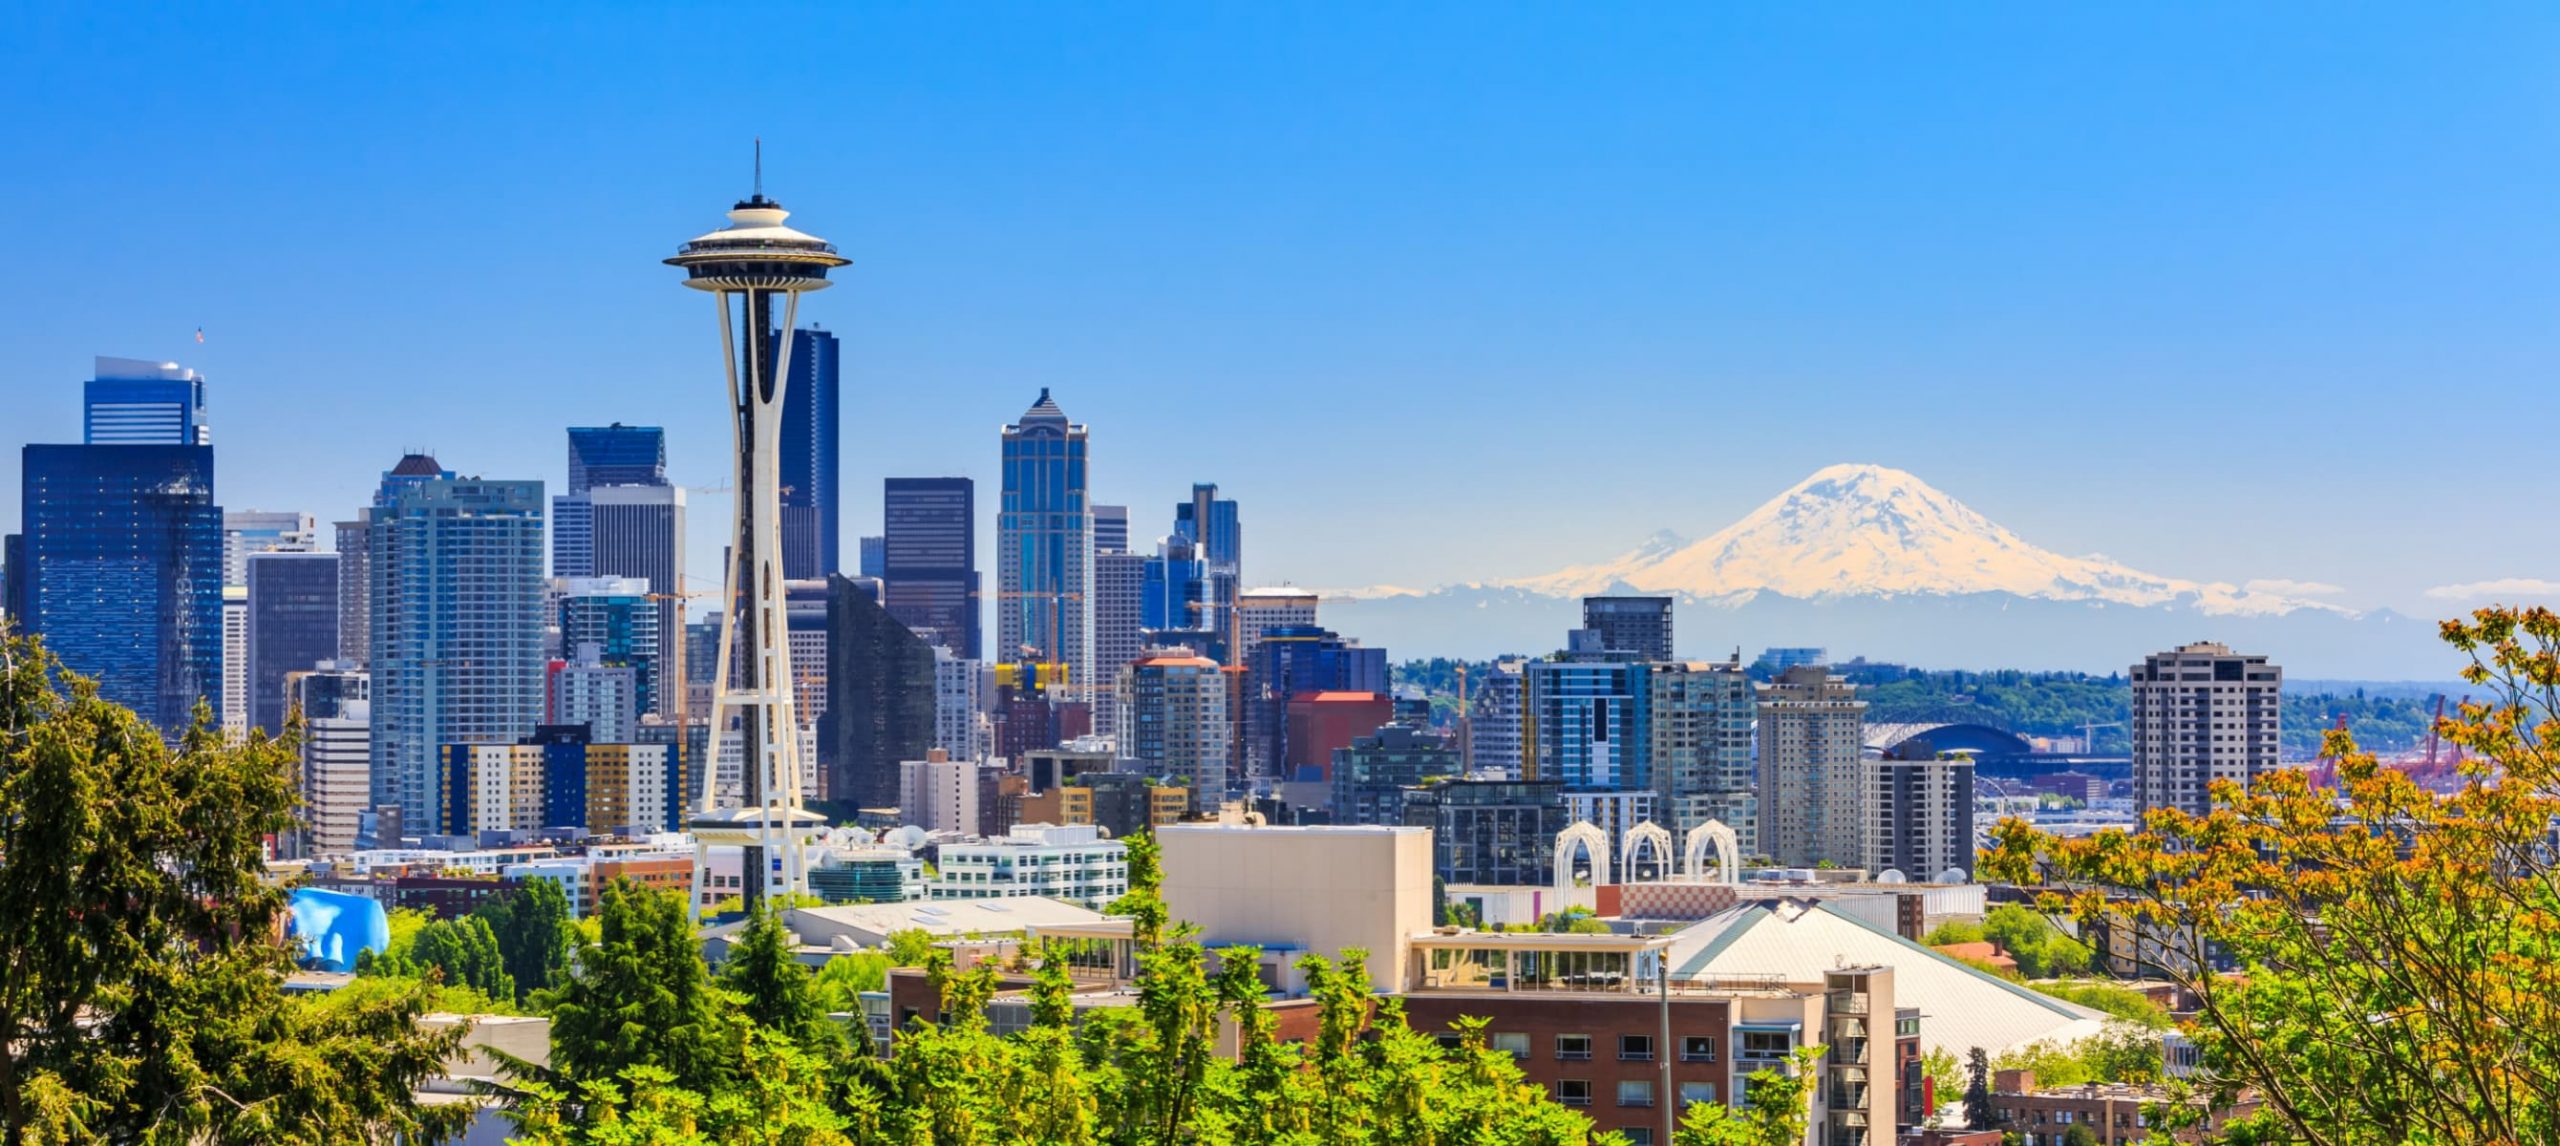 The Best Time To Visit Seattle, Washington